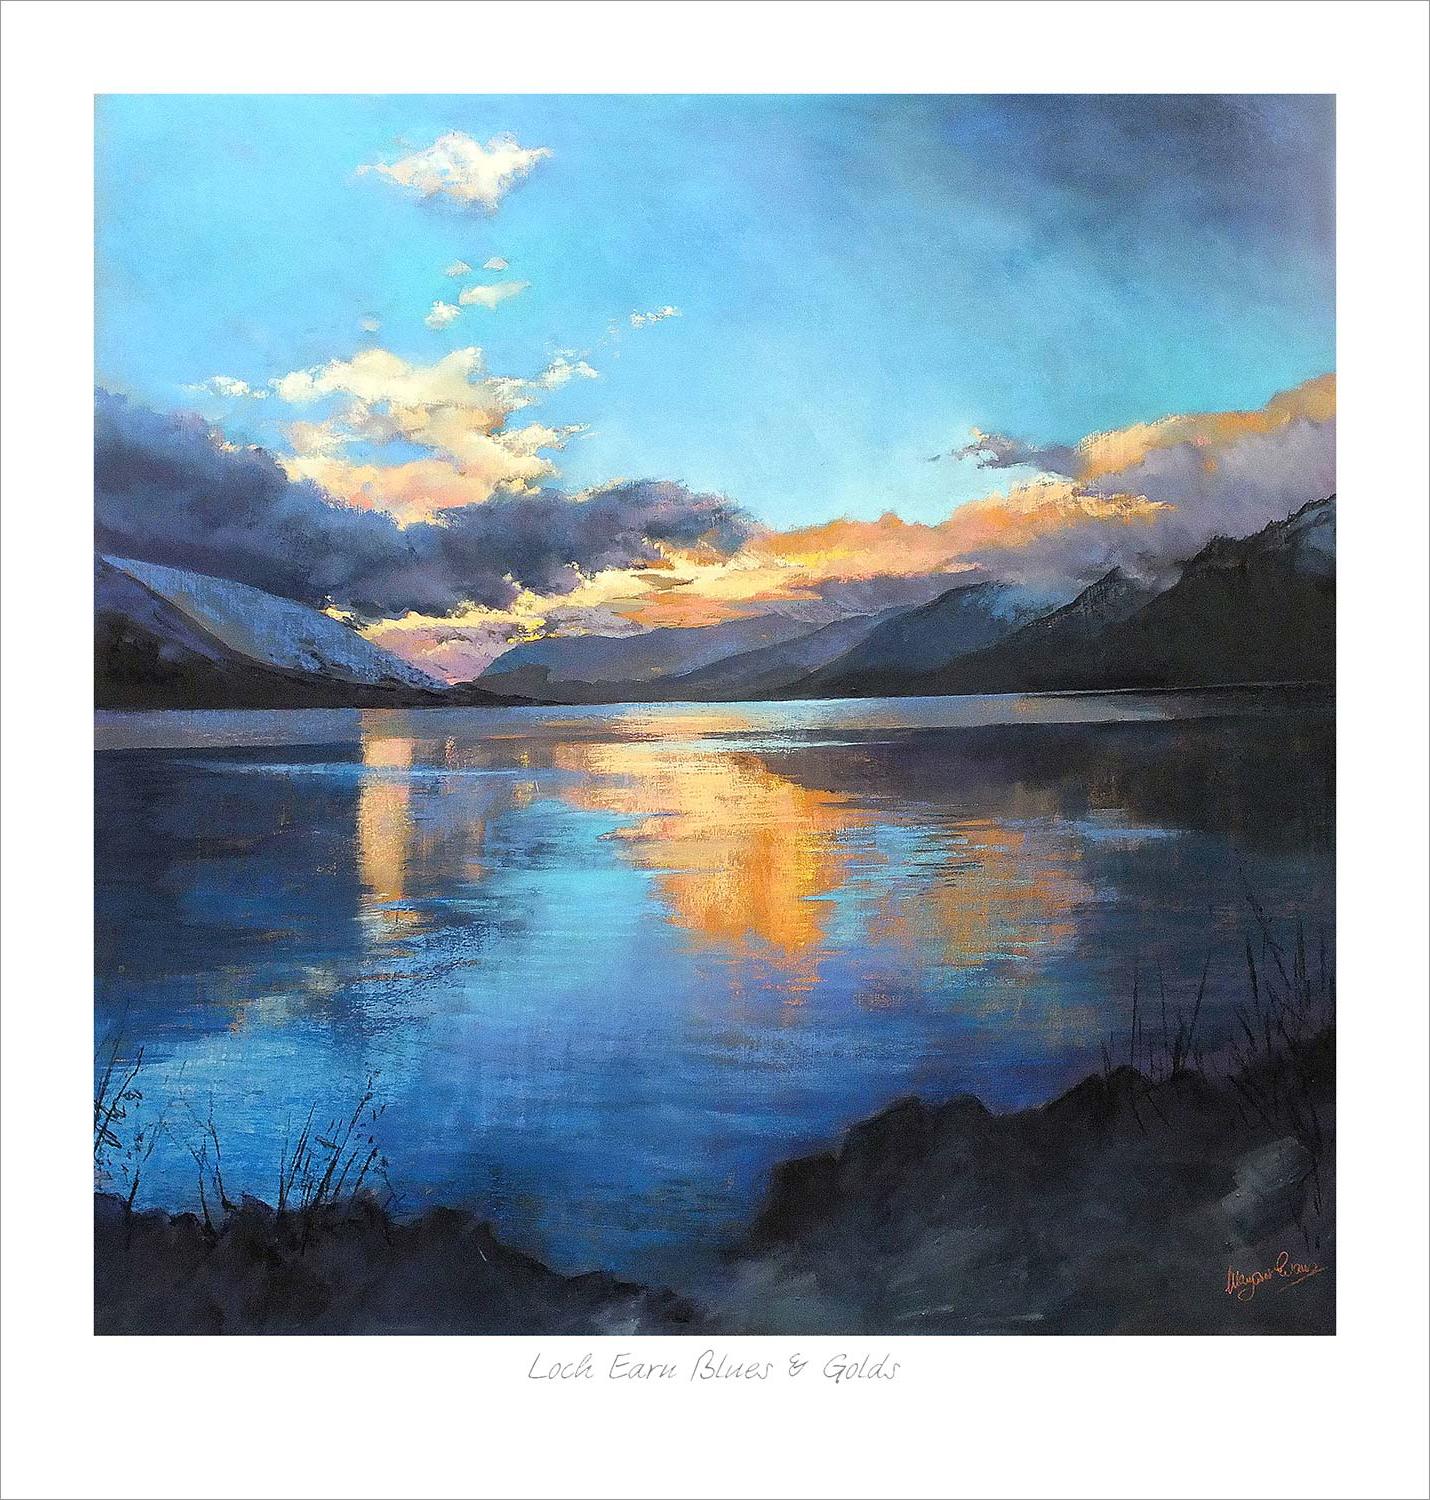 Loch Earns Blues and Golds Art Print from an original painting by artist Margaret Evans